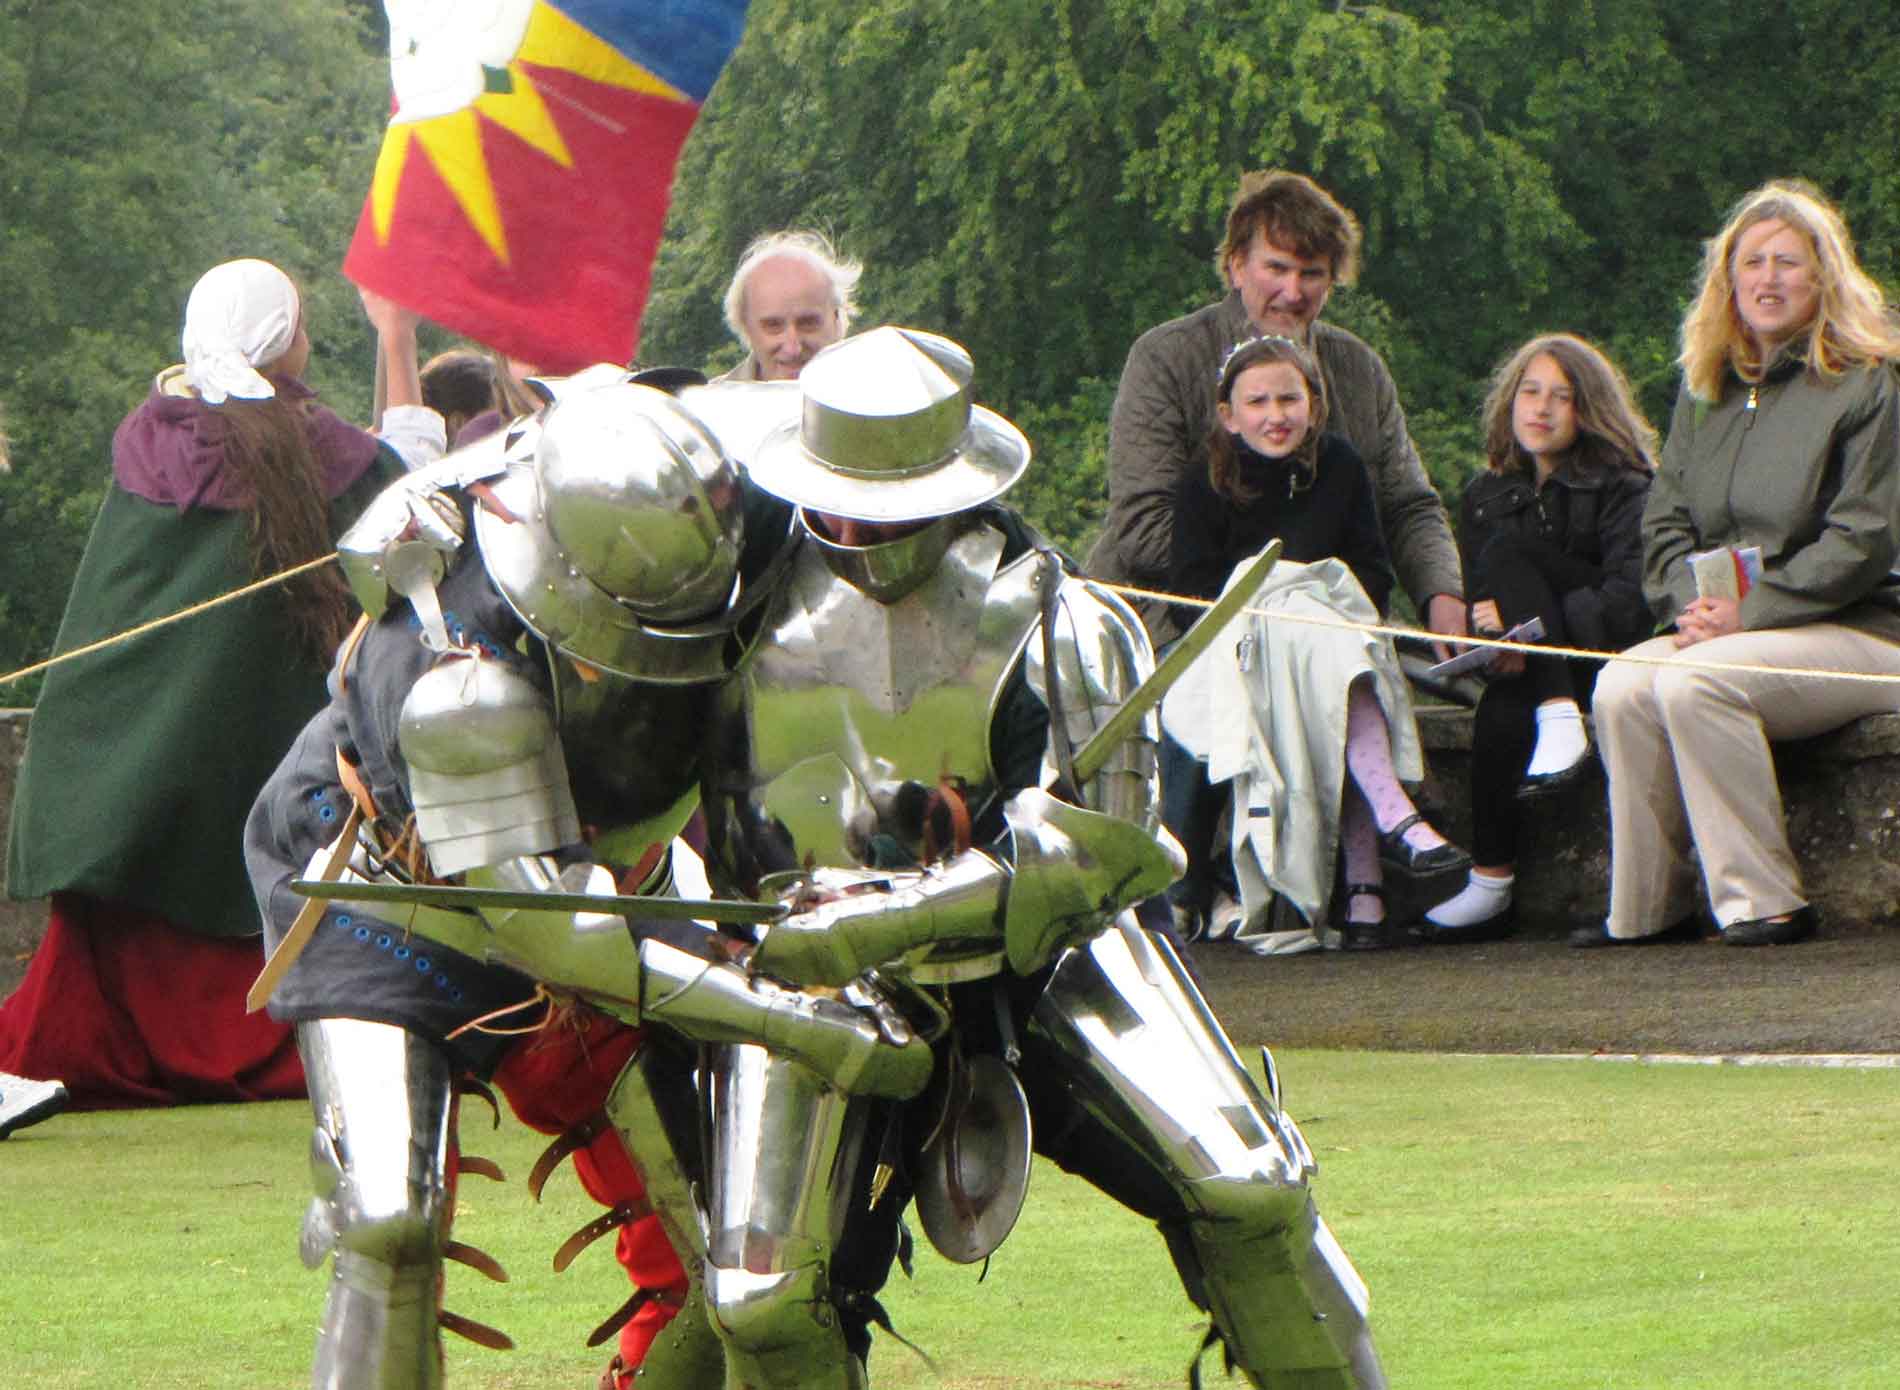 It’s harder in armour!  Settling their differences the old fashioned way at Knaresborough Castle’s Medieval Day in 2015